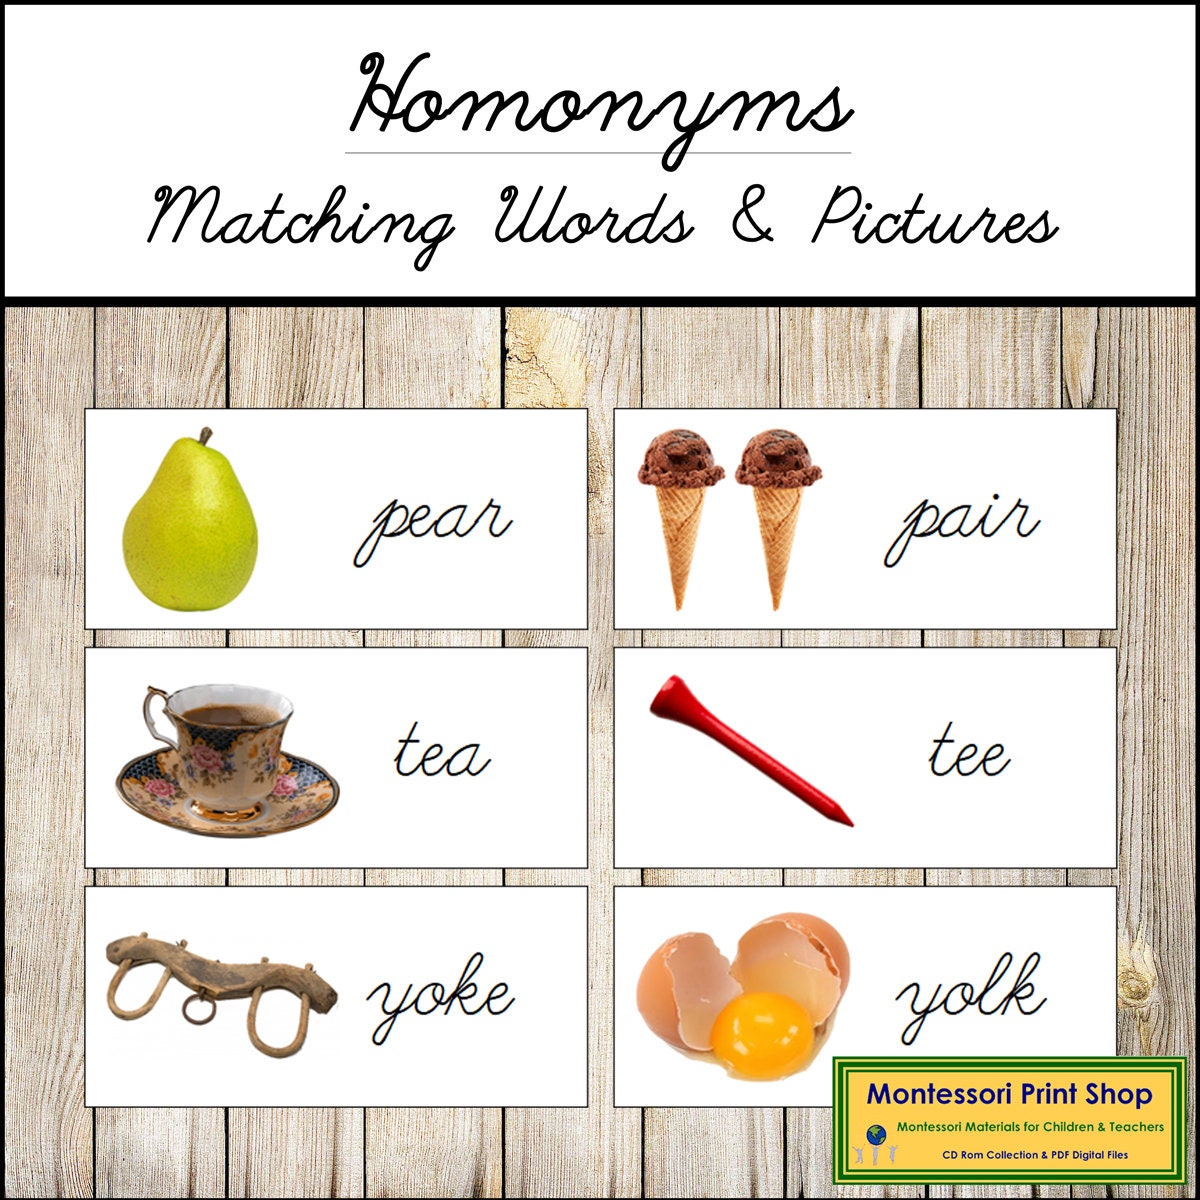 Homonyms: Meaning and Examples | bartleby